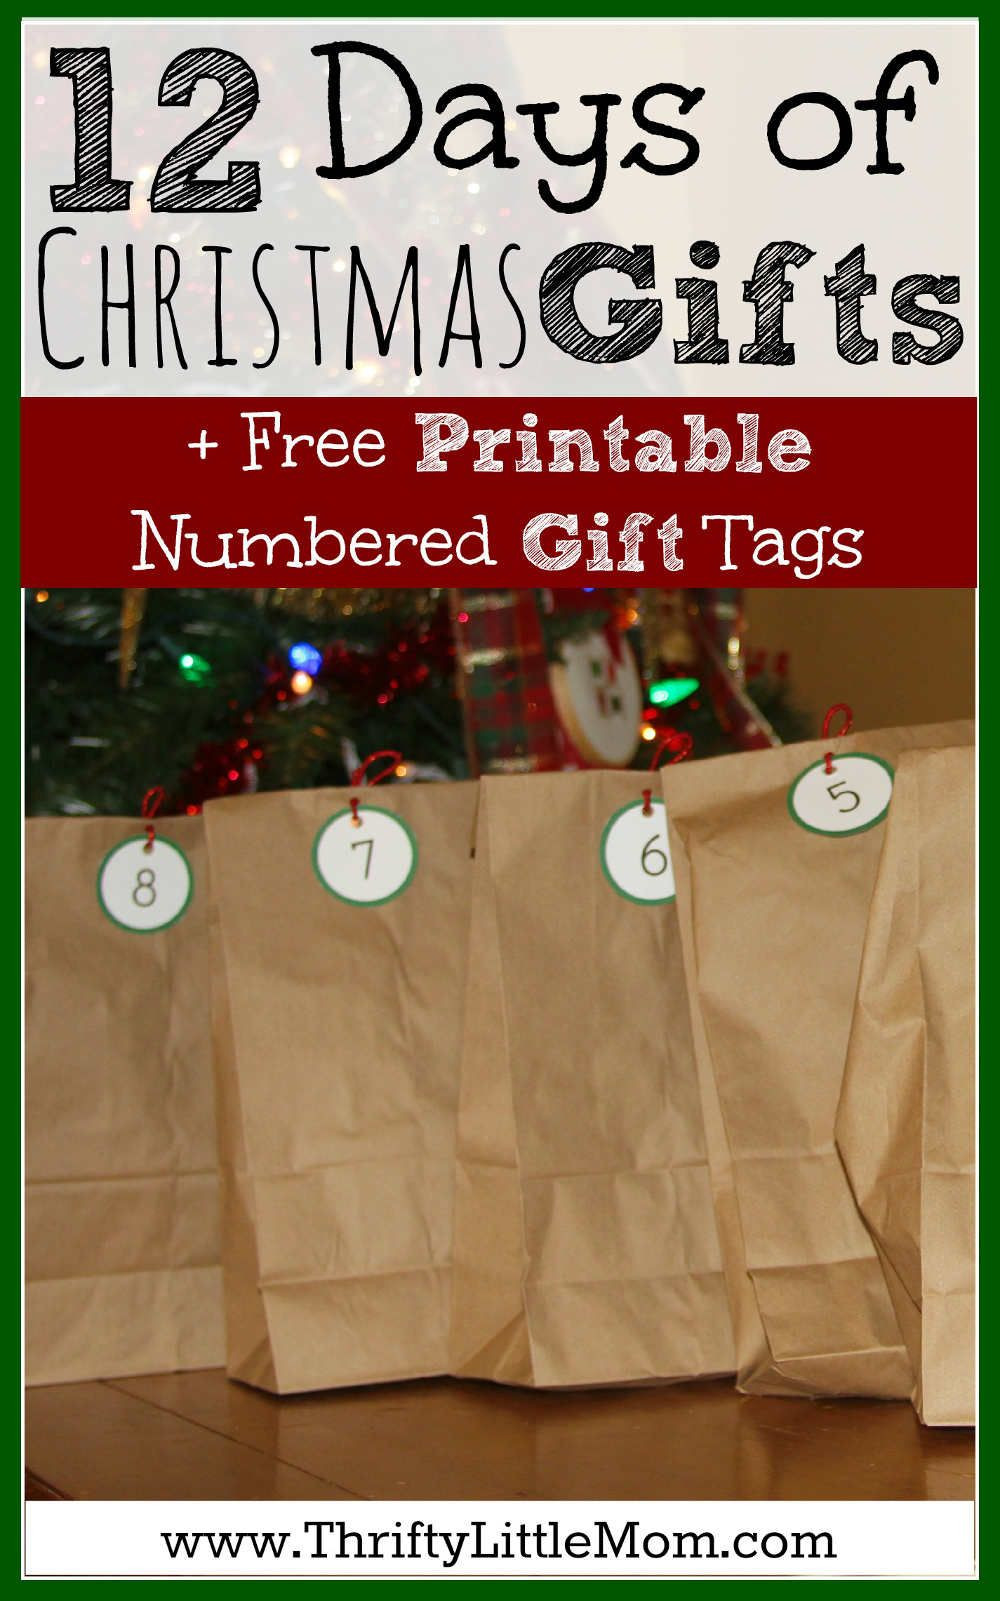 12 Days Of Christmas Gift Ideas For Kids
 How to Start Your Own 12 Days of Christmas Tradition